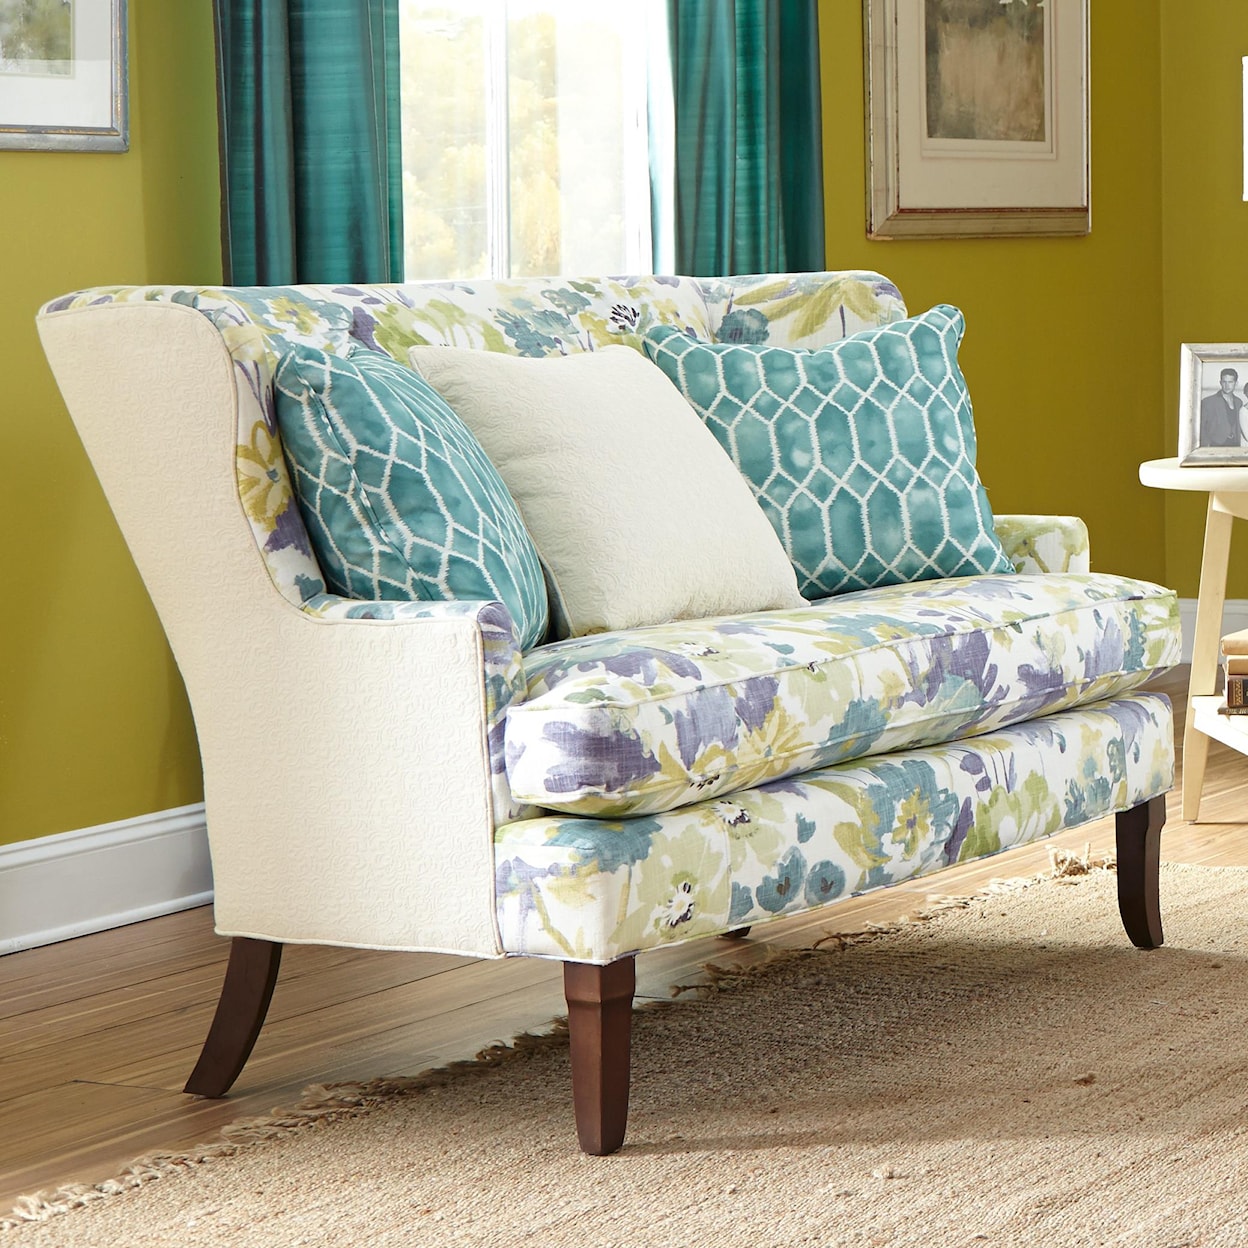 Hickory Craft Upholstered Chairs Settee